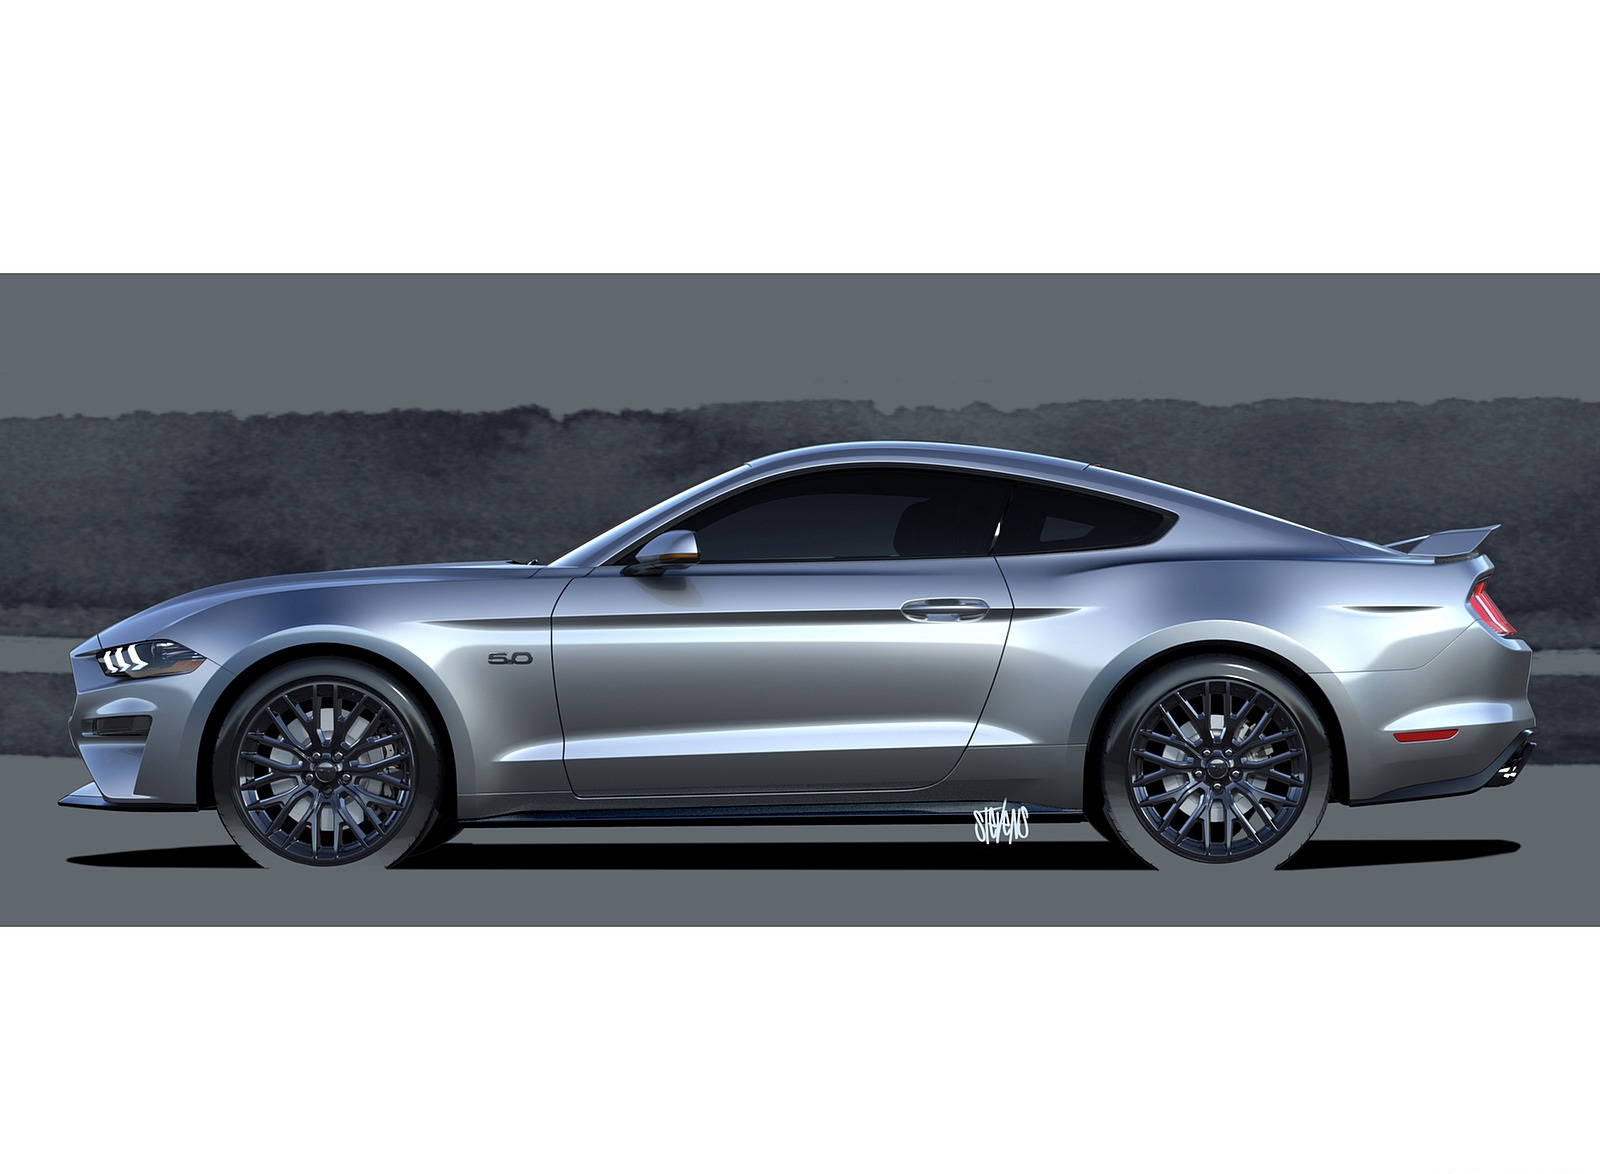 2018 Ford Mustang V8 GT Design Sketch Wallpapers #18 of 25